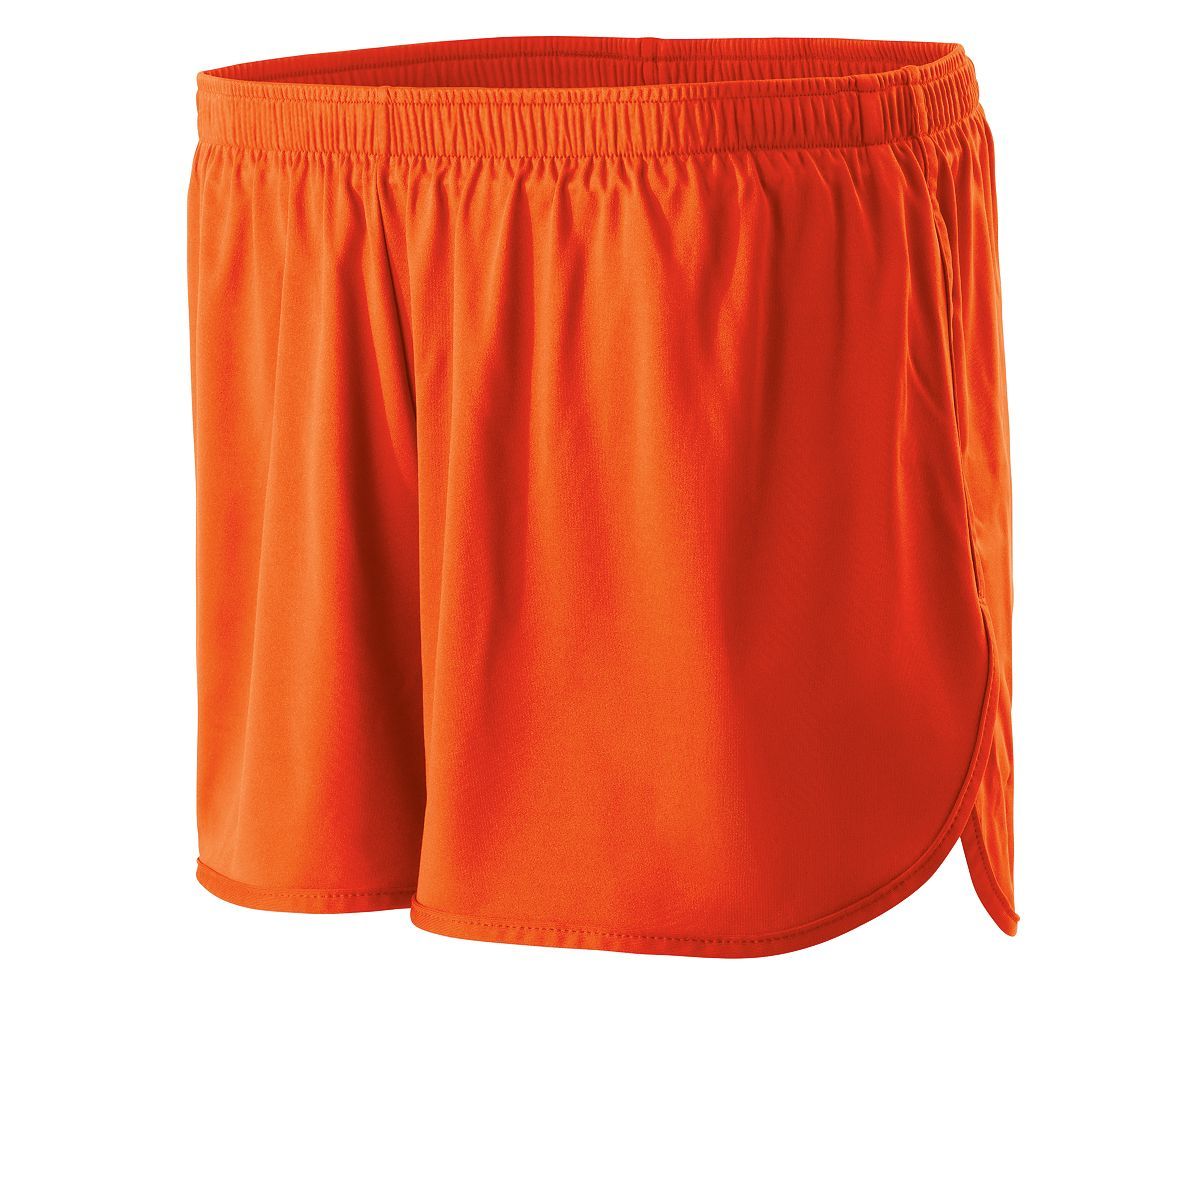 Holloway Anchor Shorts in Orange  -Part of the Adult, Adult-Shorts, Track-Field, Holloway product lines at KanaleyCreations.com